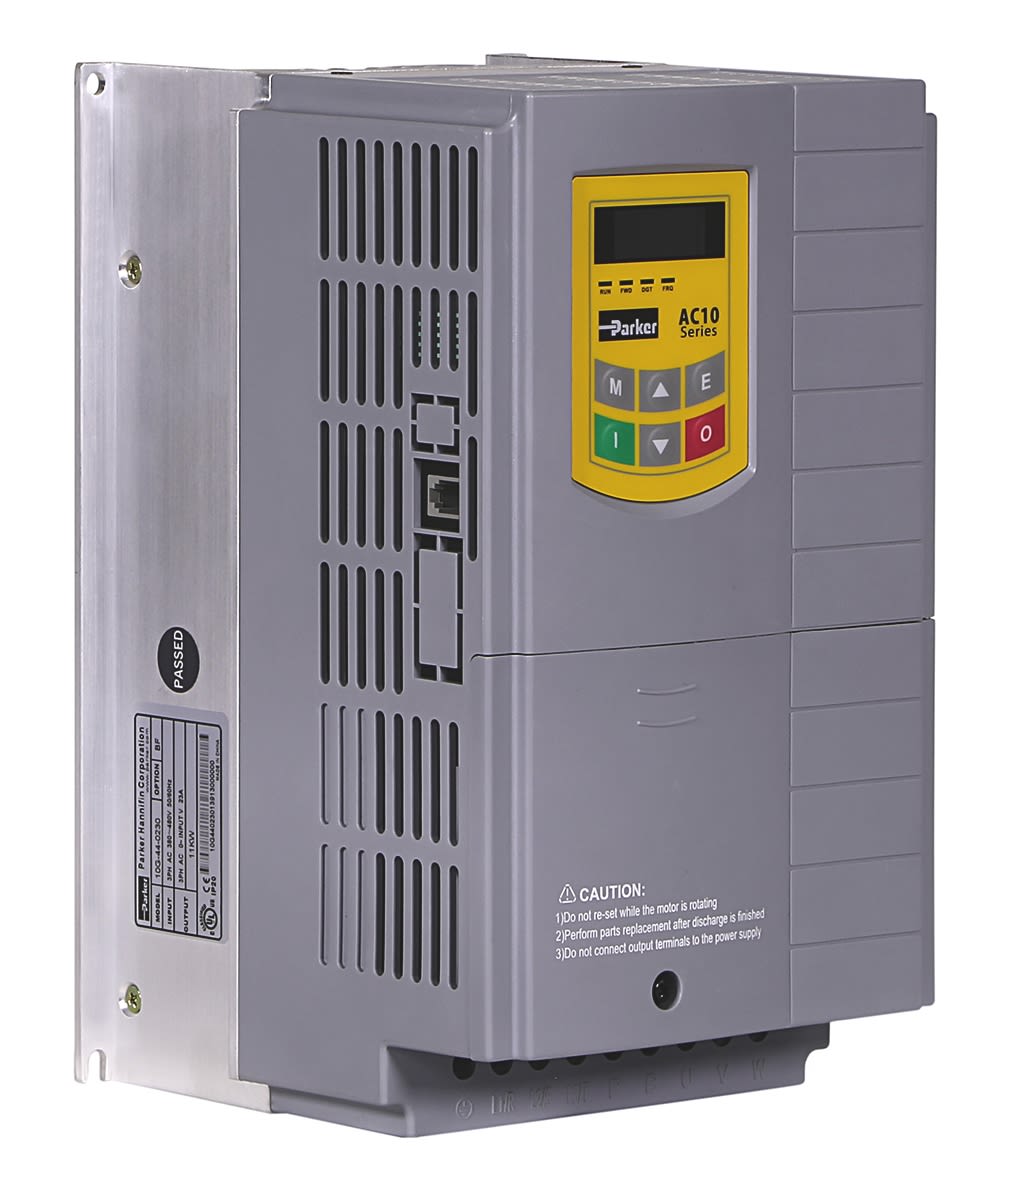 Parker AC10 Inverter Drive, 3-Phase In, 0.5 → 590Hz Out, 7.5 kW, 400 V ac, 22.1 A